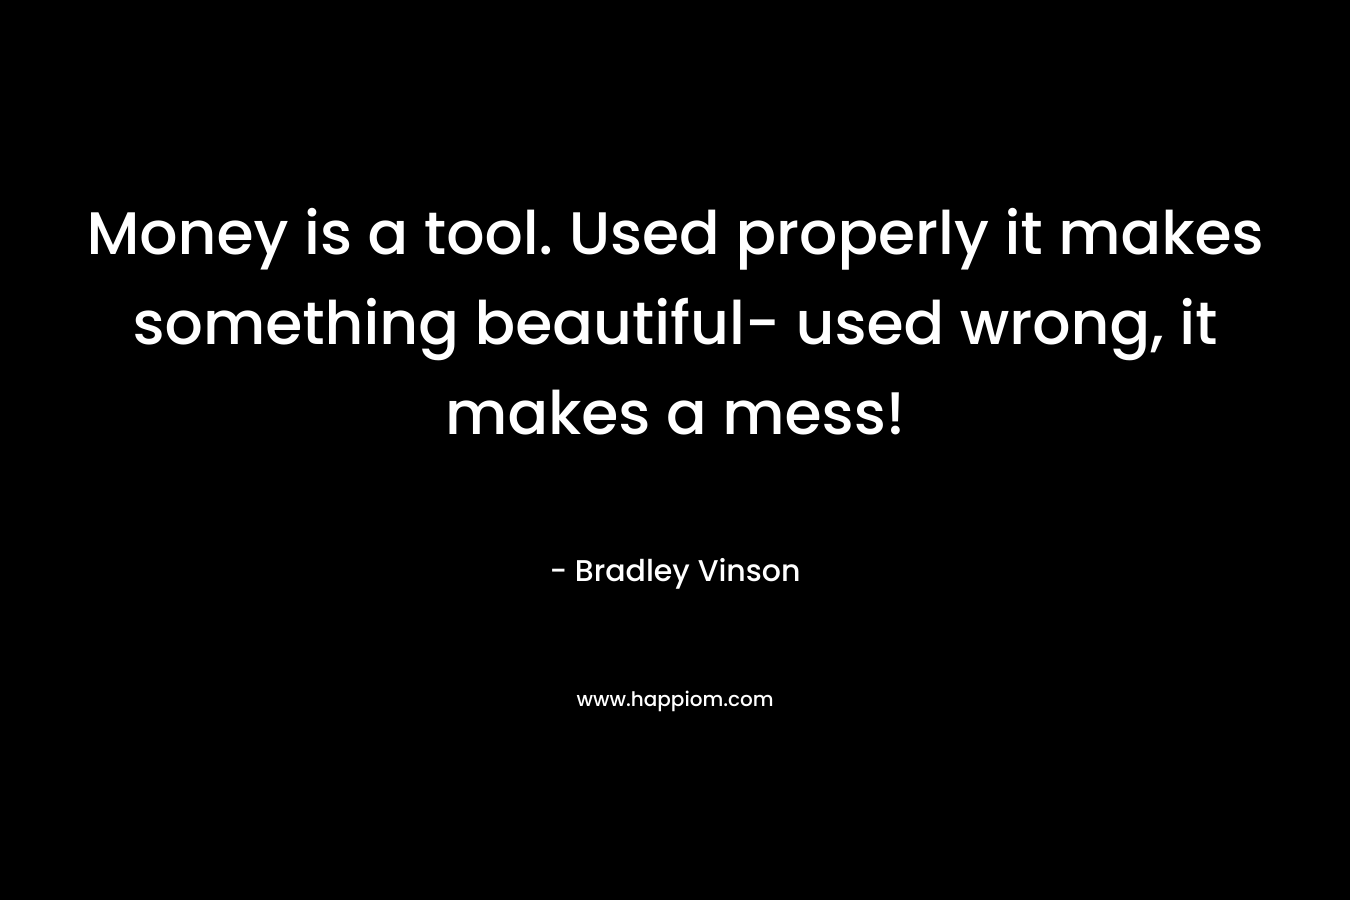 Money is a tool. Used properly it makes something beautiful- used wrong, it makes a mess! – Bradley Vinson